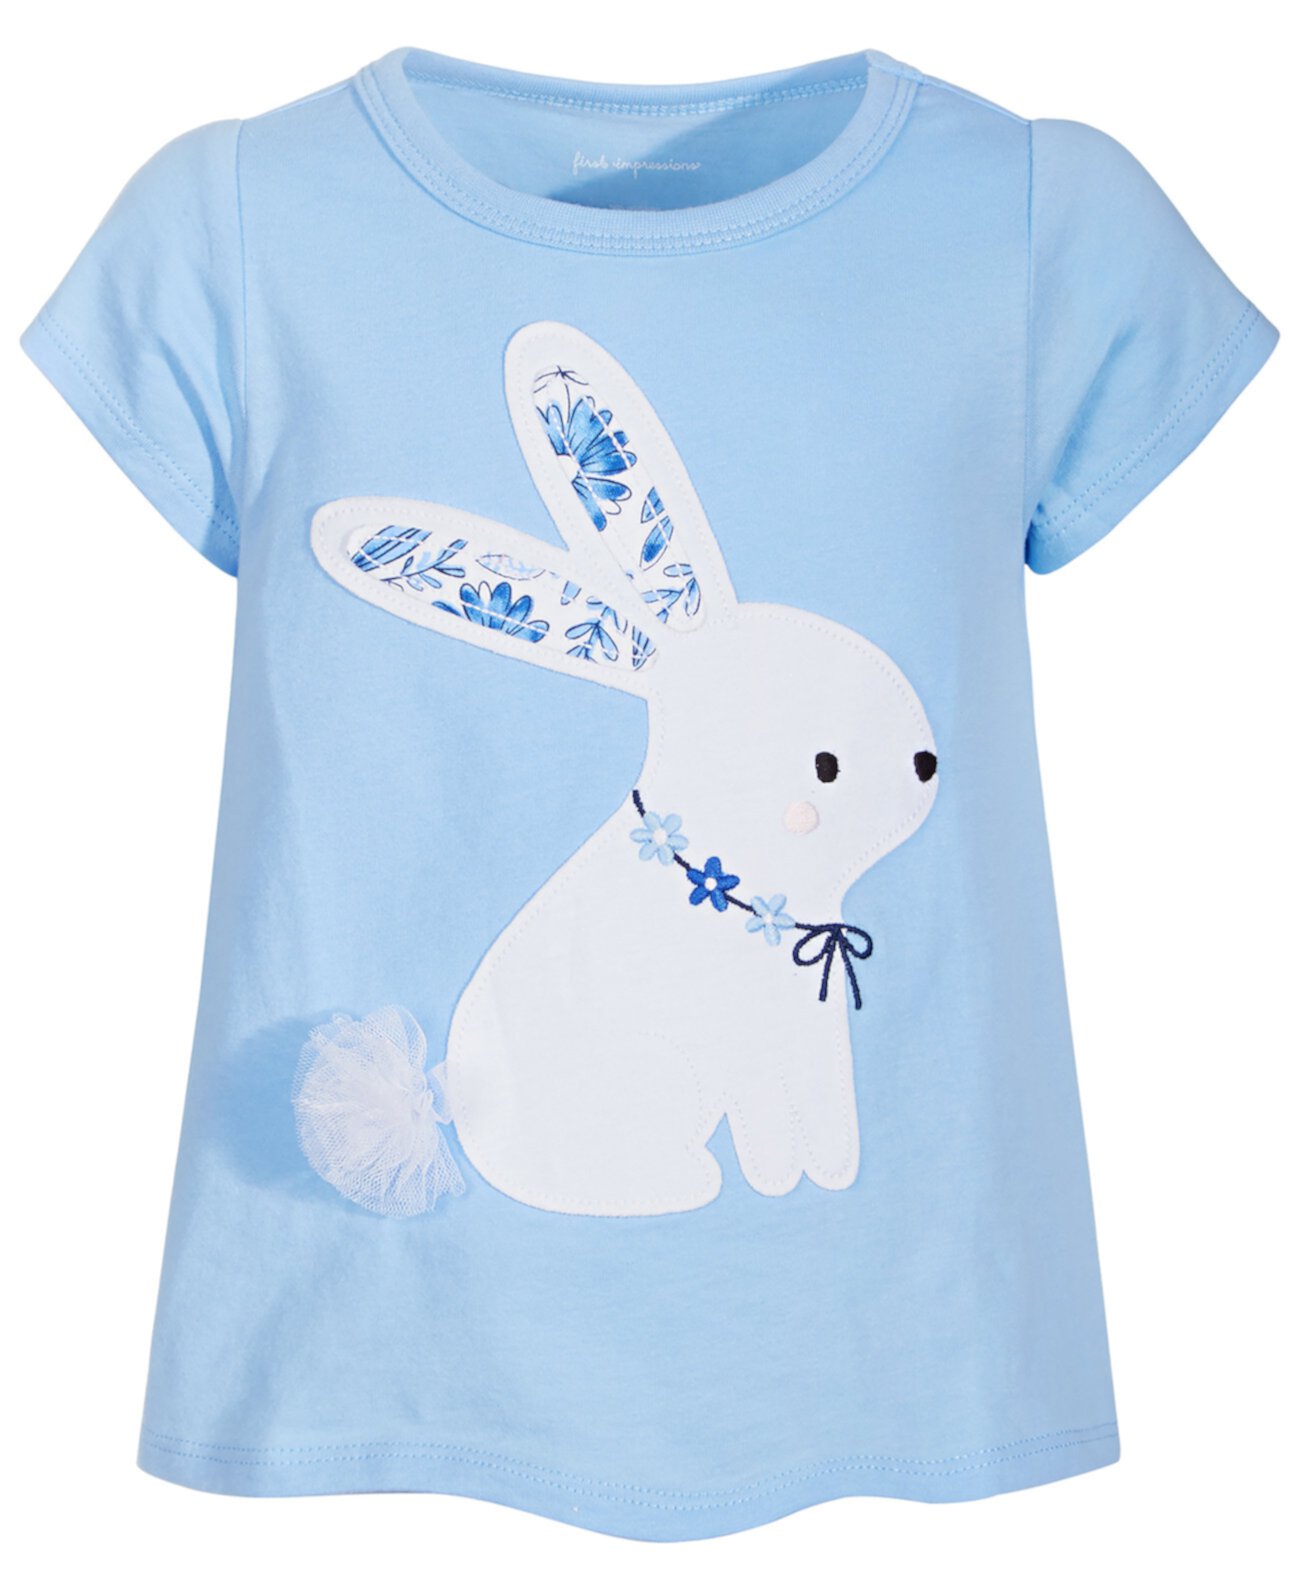 Toddler Girls Bunny Cotton Top, Created for Macy's First Impressions